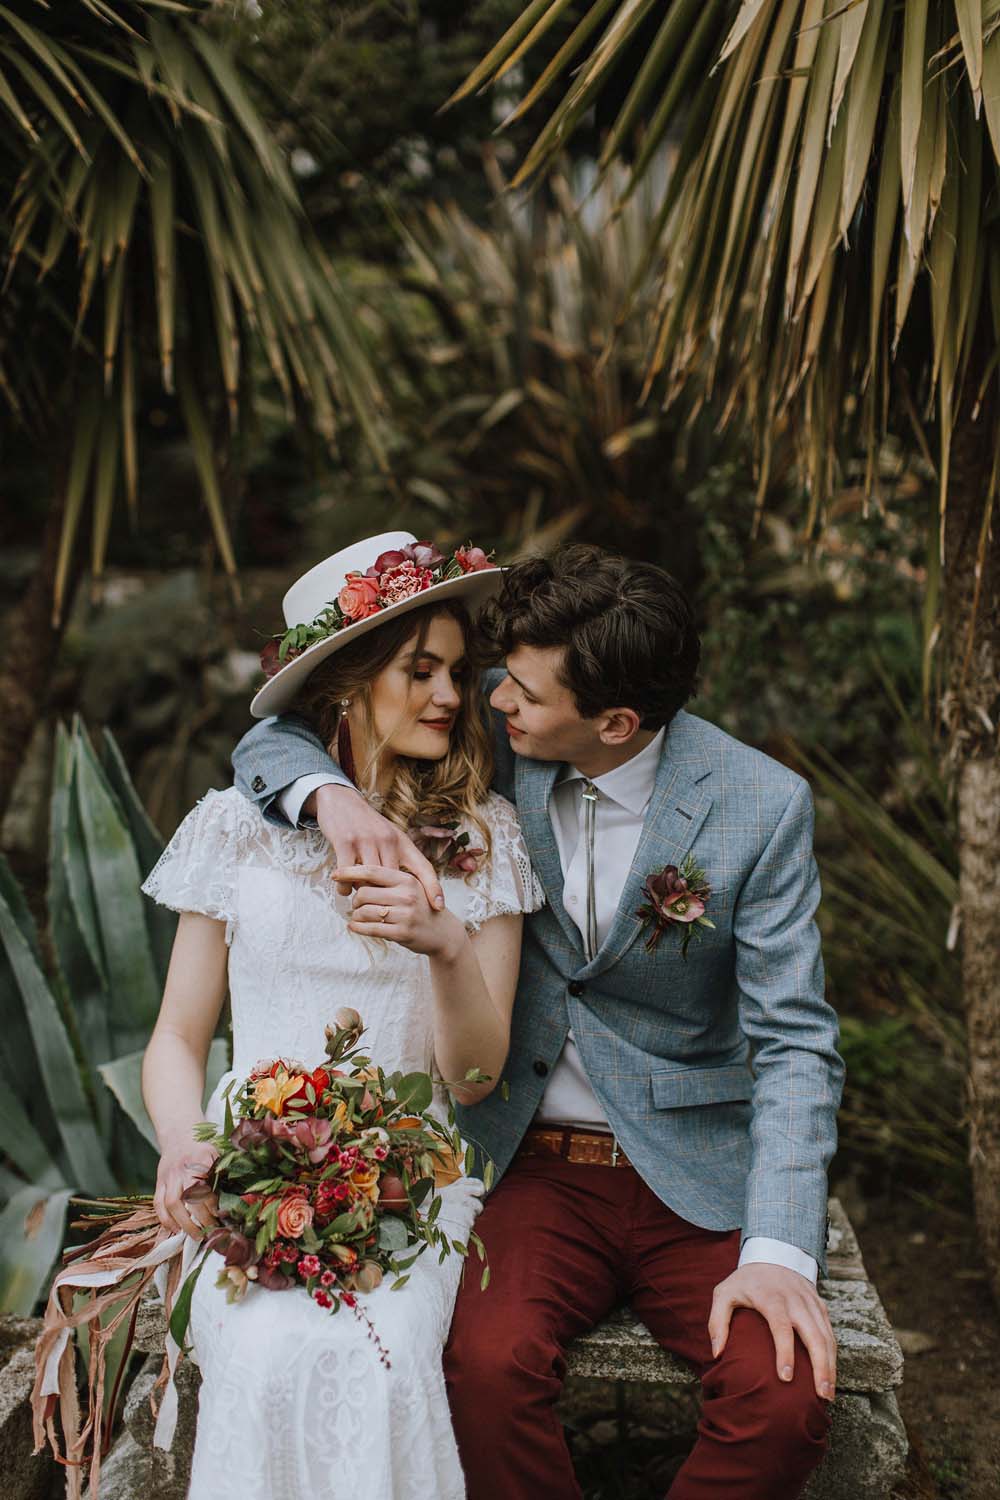 These Are The Details You Need For A Southwestern-Inspired Wedding - bride and groom